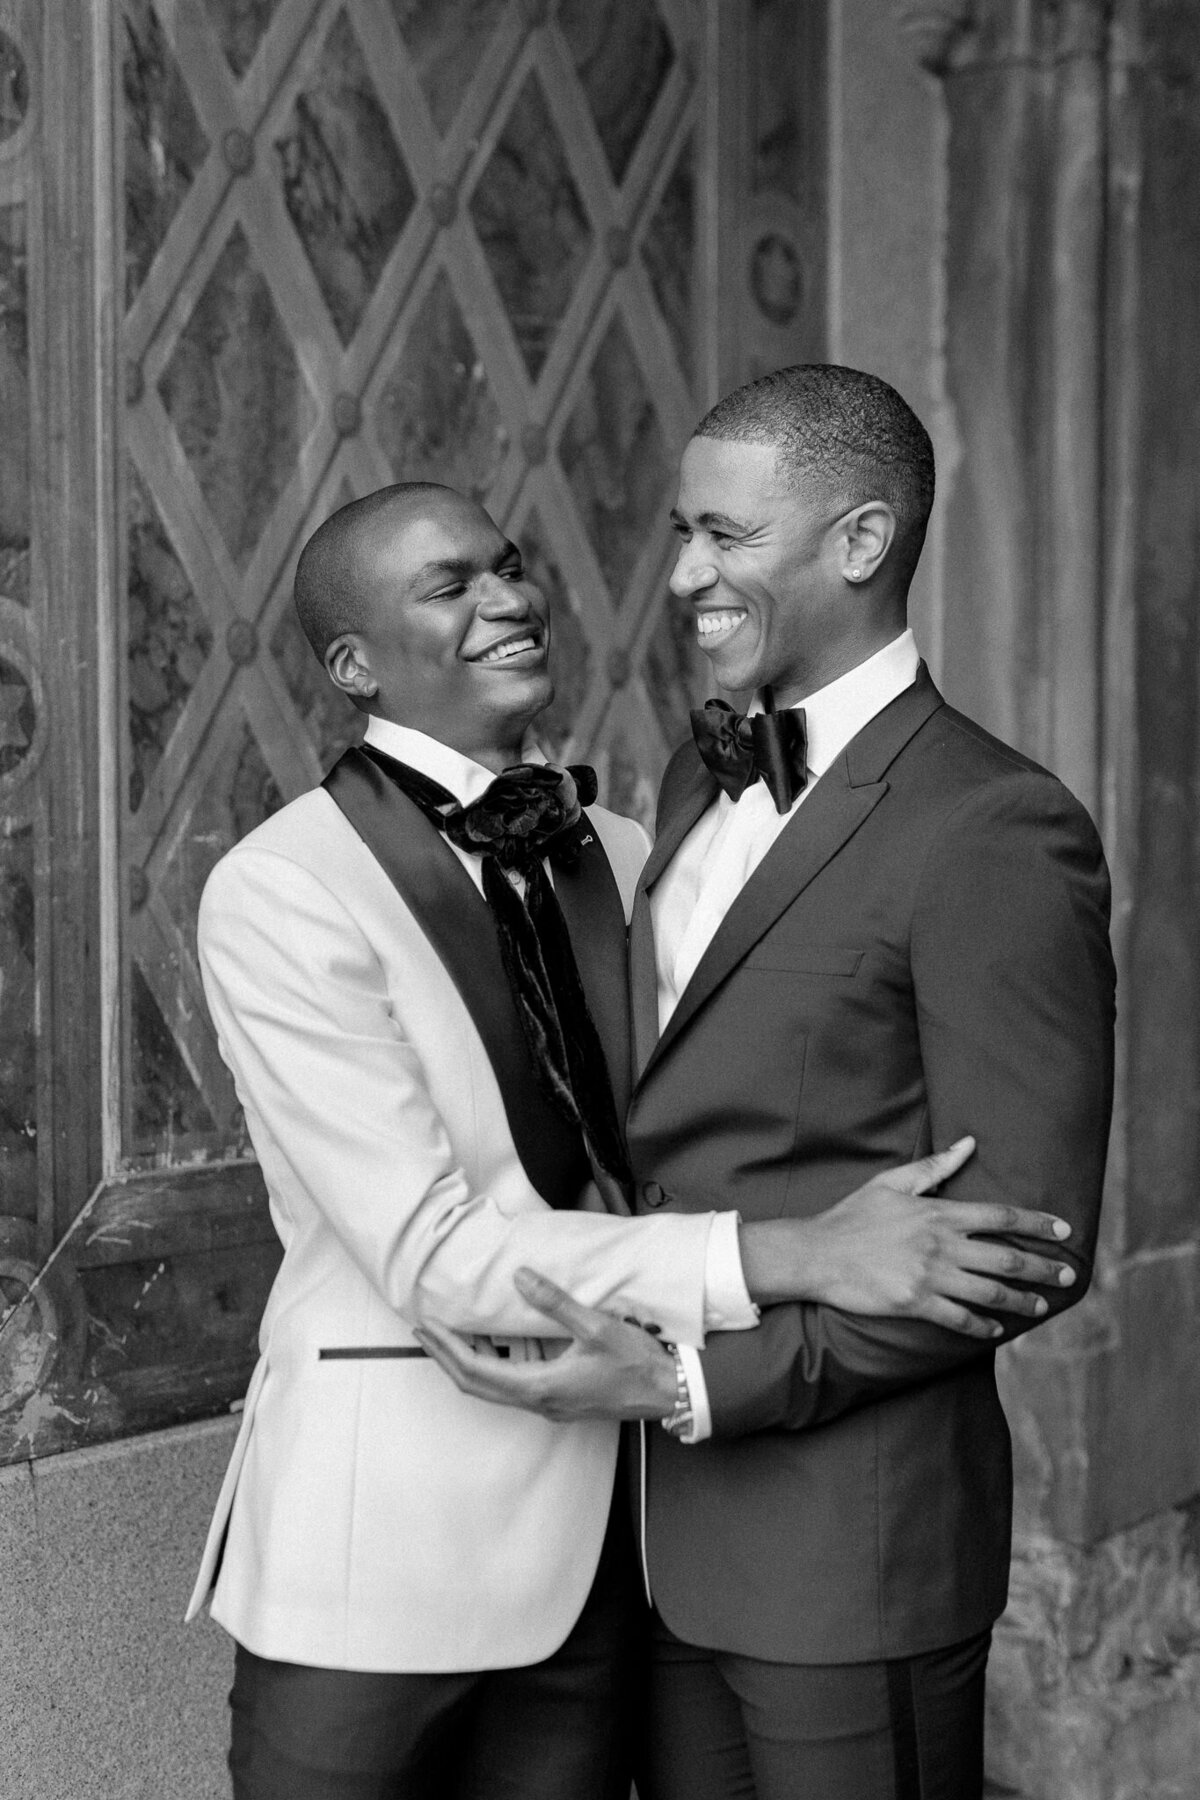 An image of two men at an elopement in Central Park in Manhattan, New York City